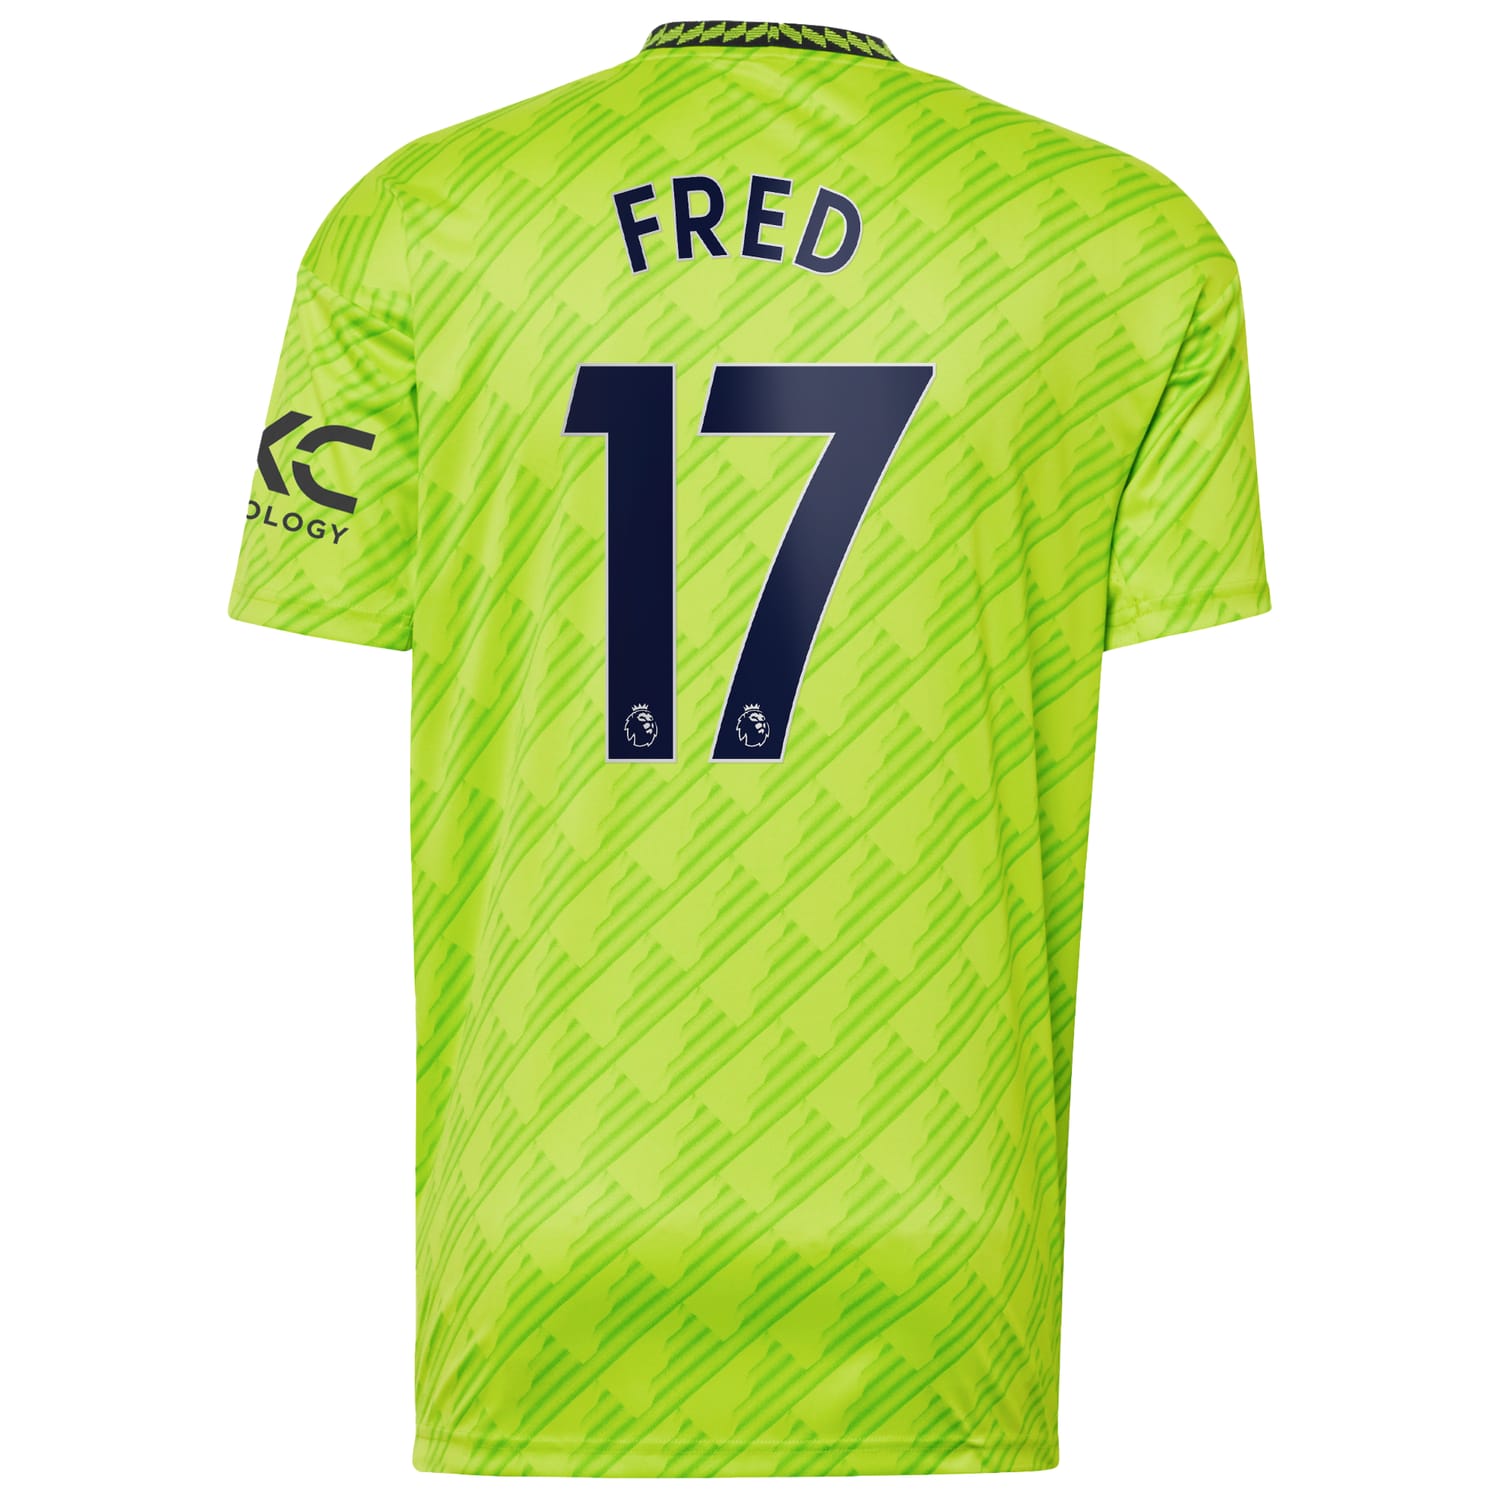 Premier League Manchester United Third Jersey Shirt 2022-23 player Fred 17 printing for Men